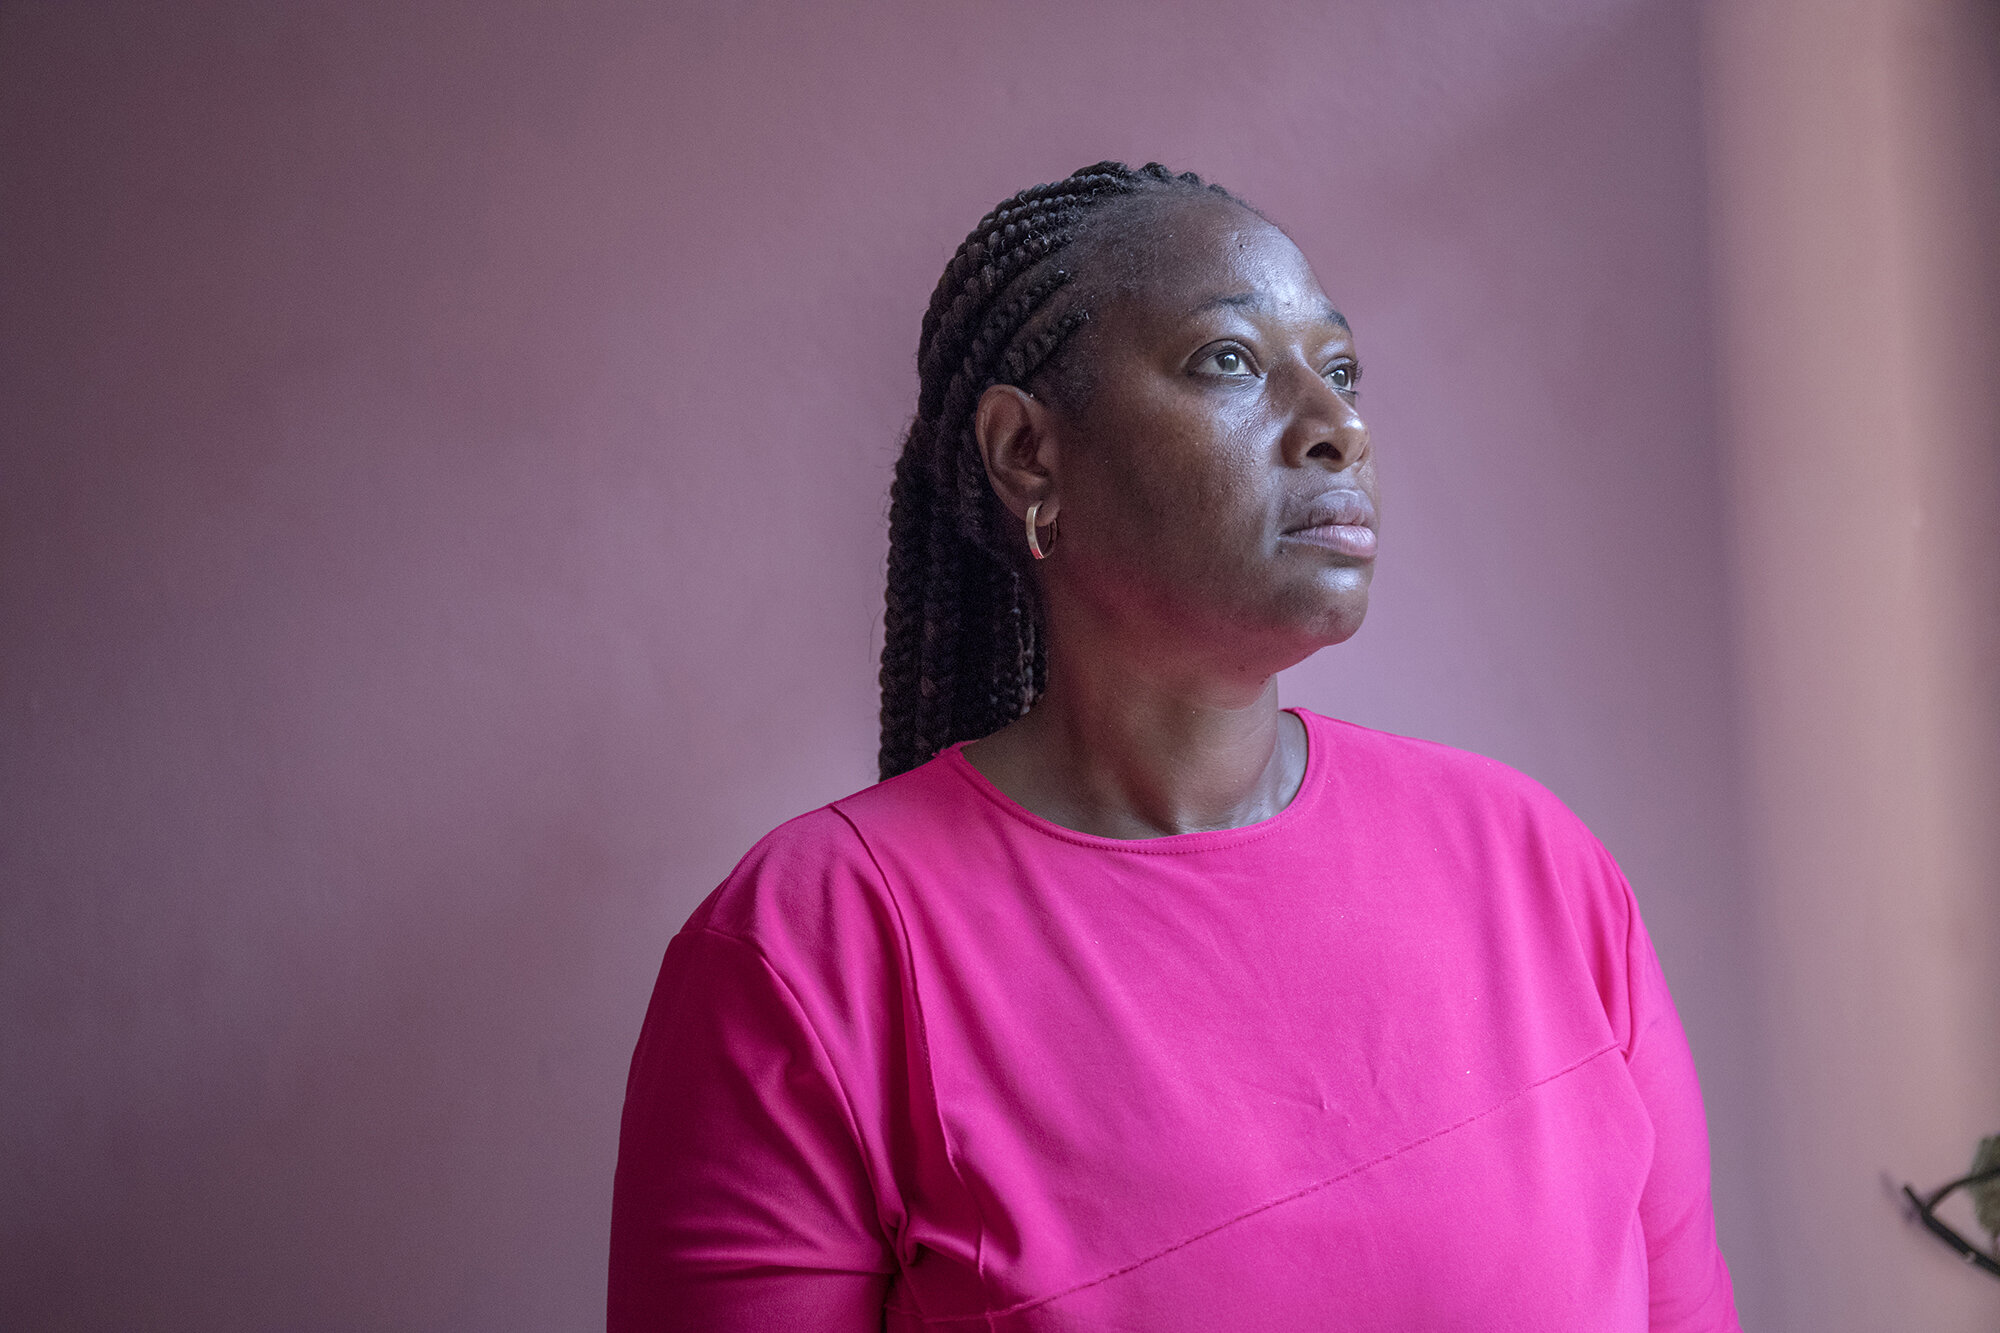  Luanda, Angola. Cândida Sónia Neves Ferreira (40) is part of the support group, Fight for Life Association, for women living with HIV. “My attitude after getting more information about HIV was to say that from me no one else will receive the virus